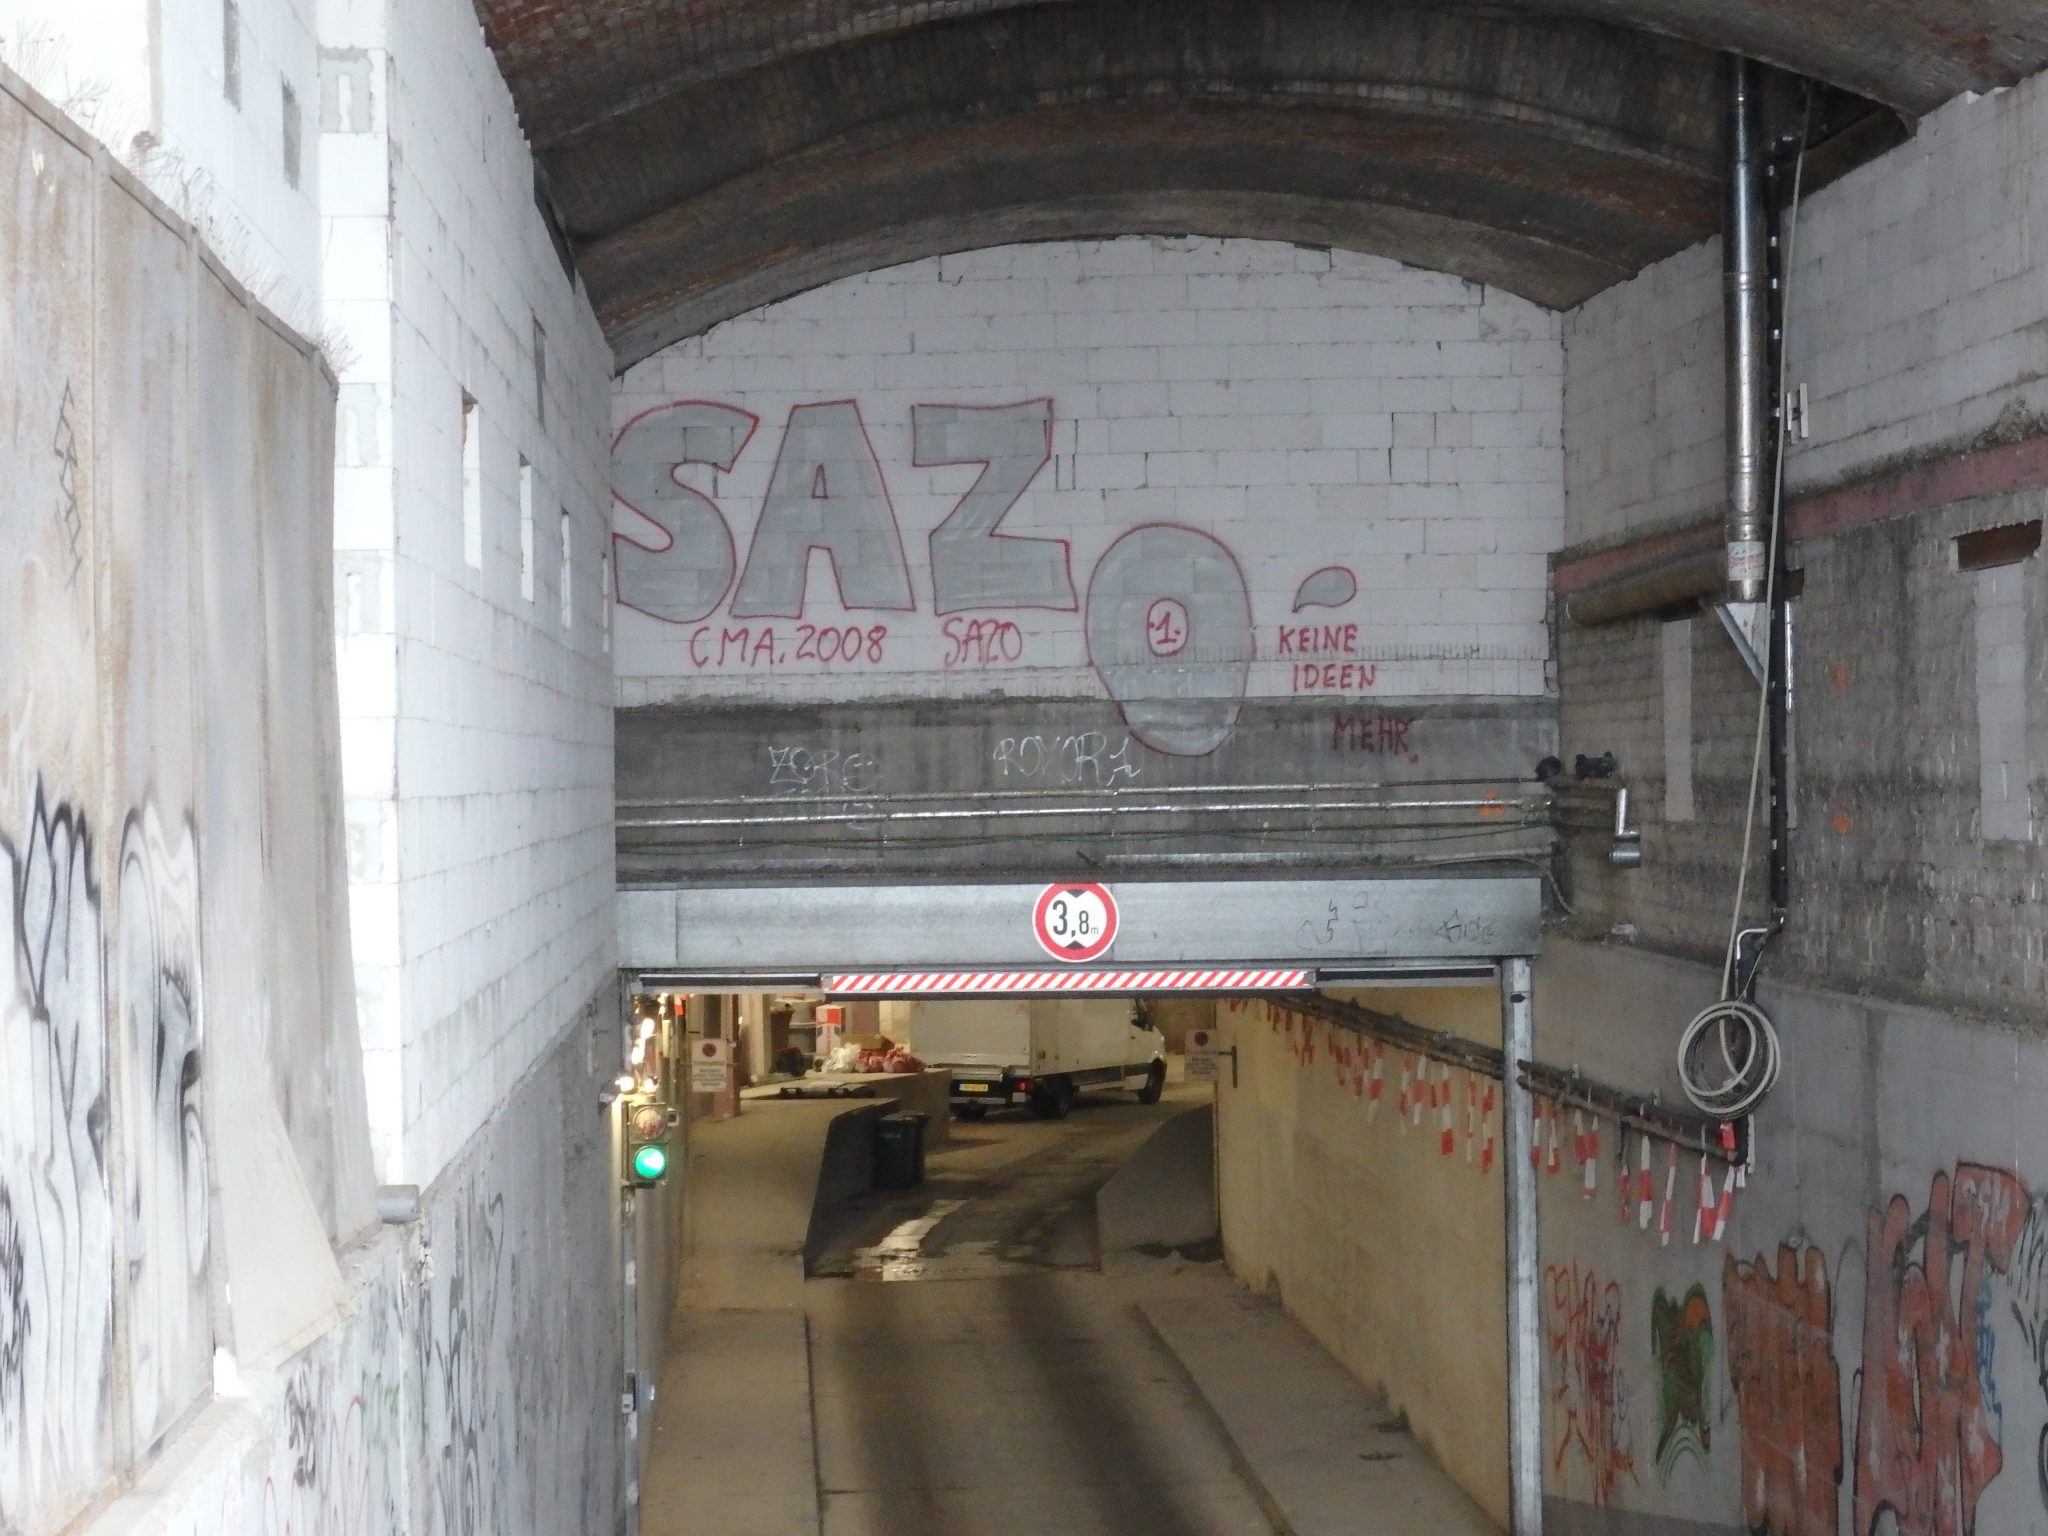 How did "Saz" get there?